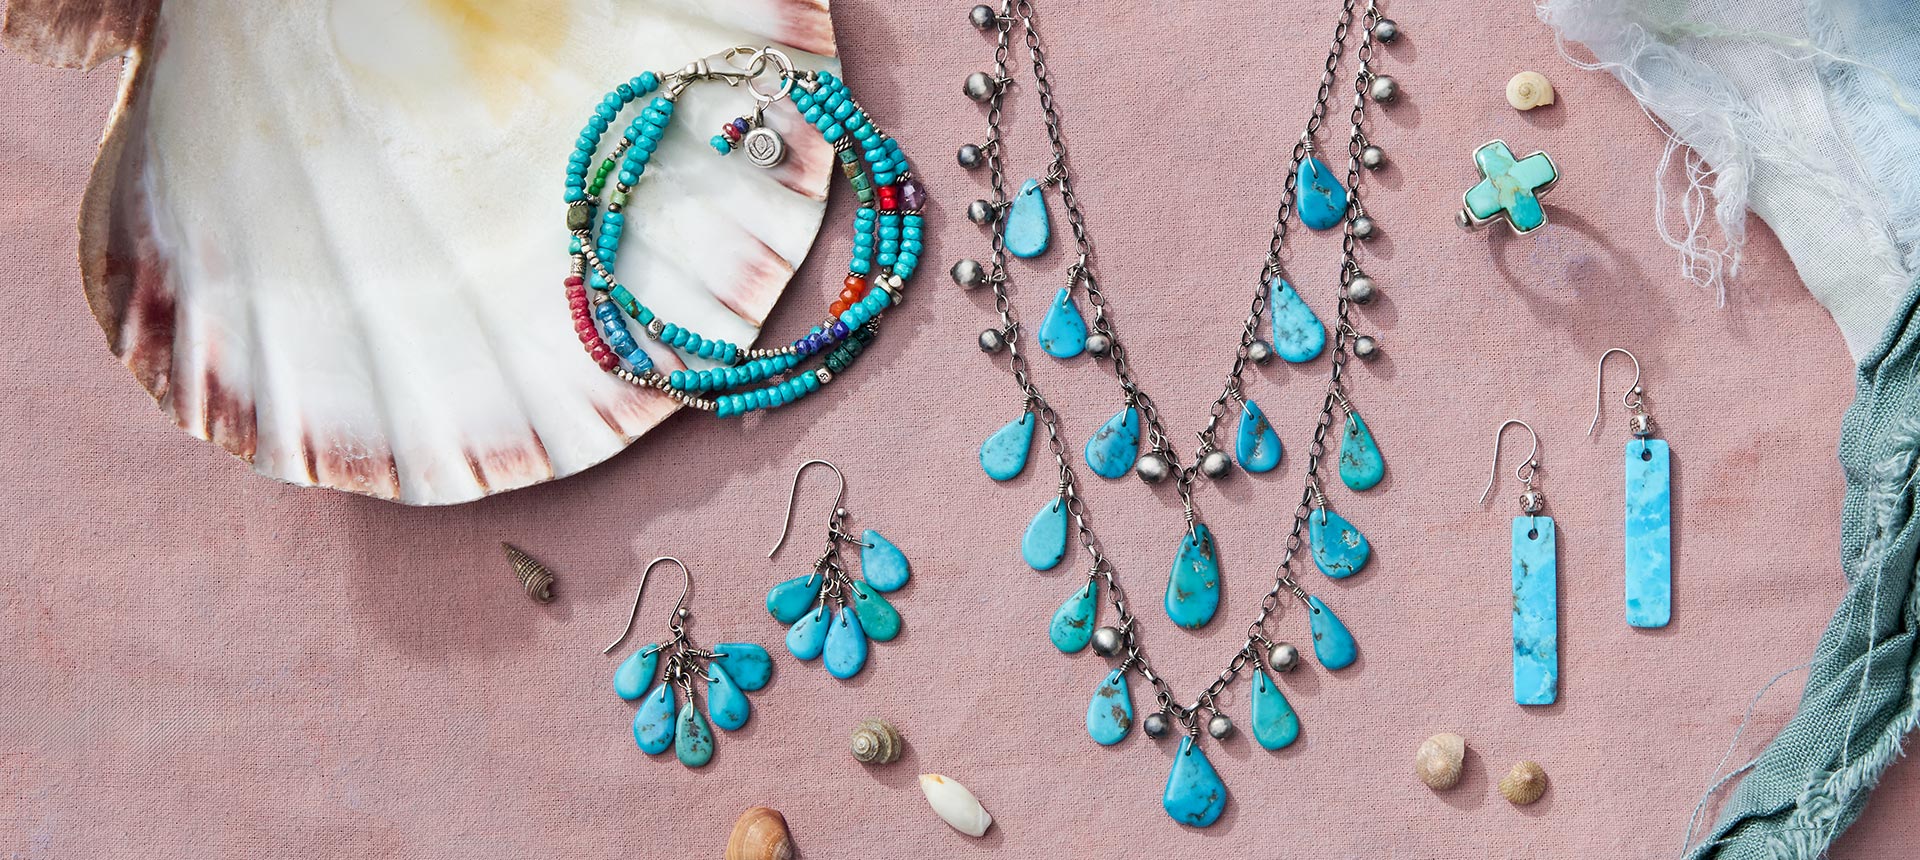 Beauty of Turquoise Jewelry